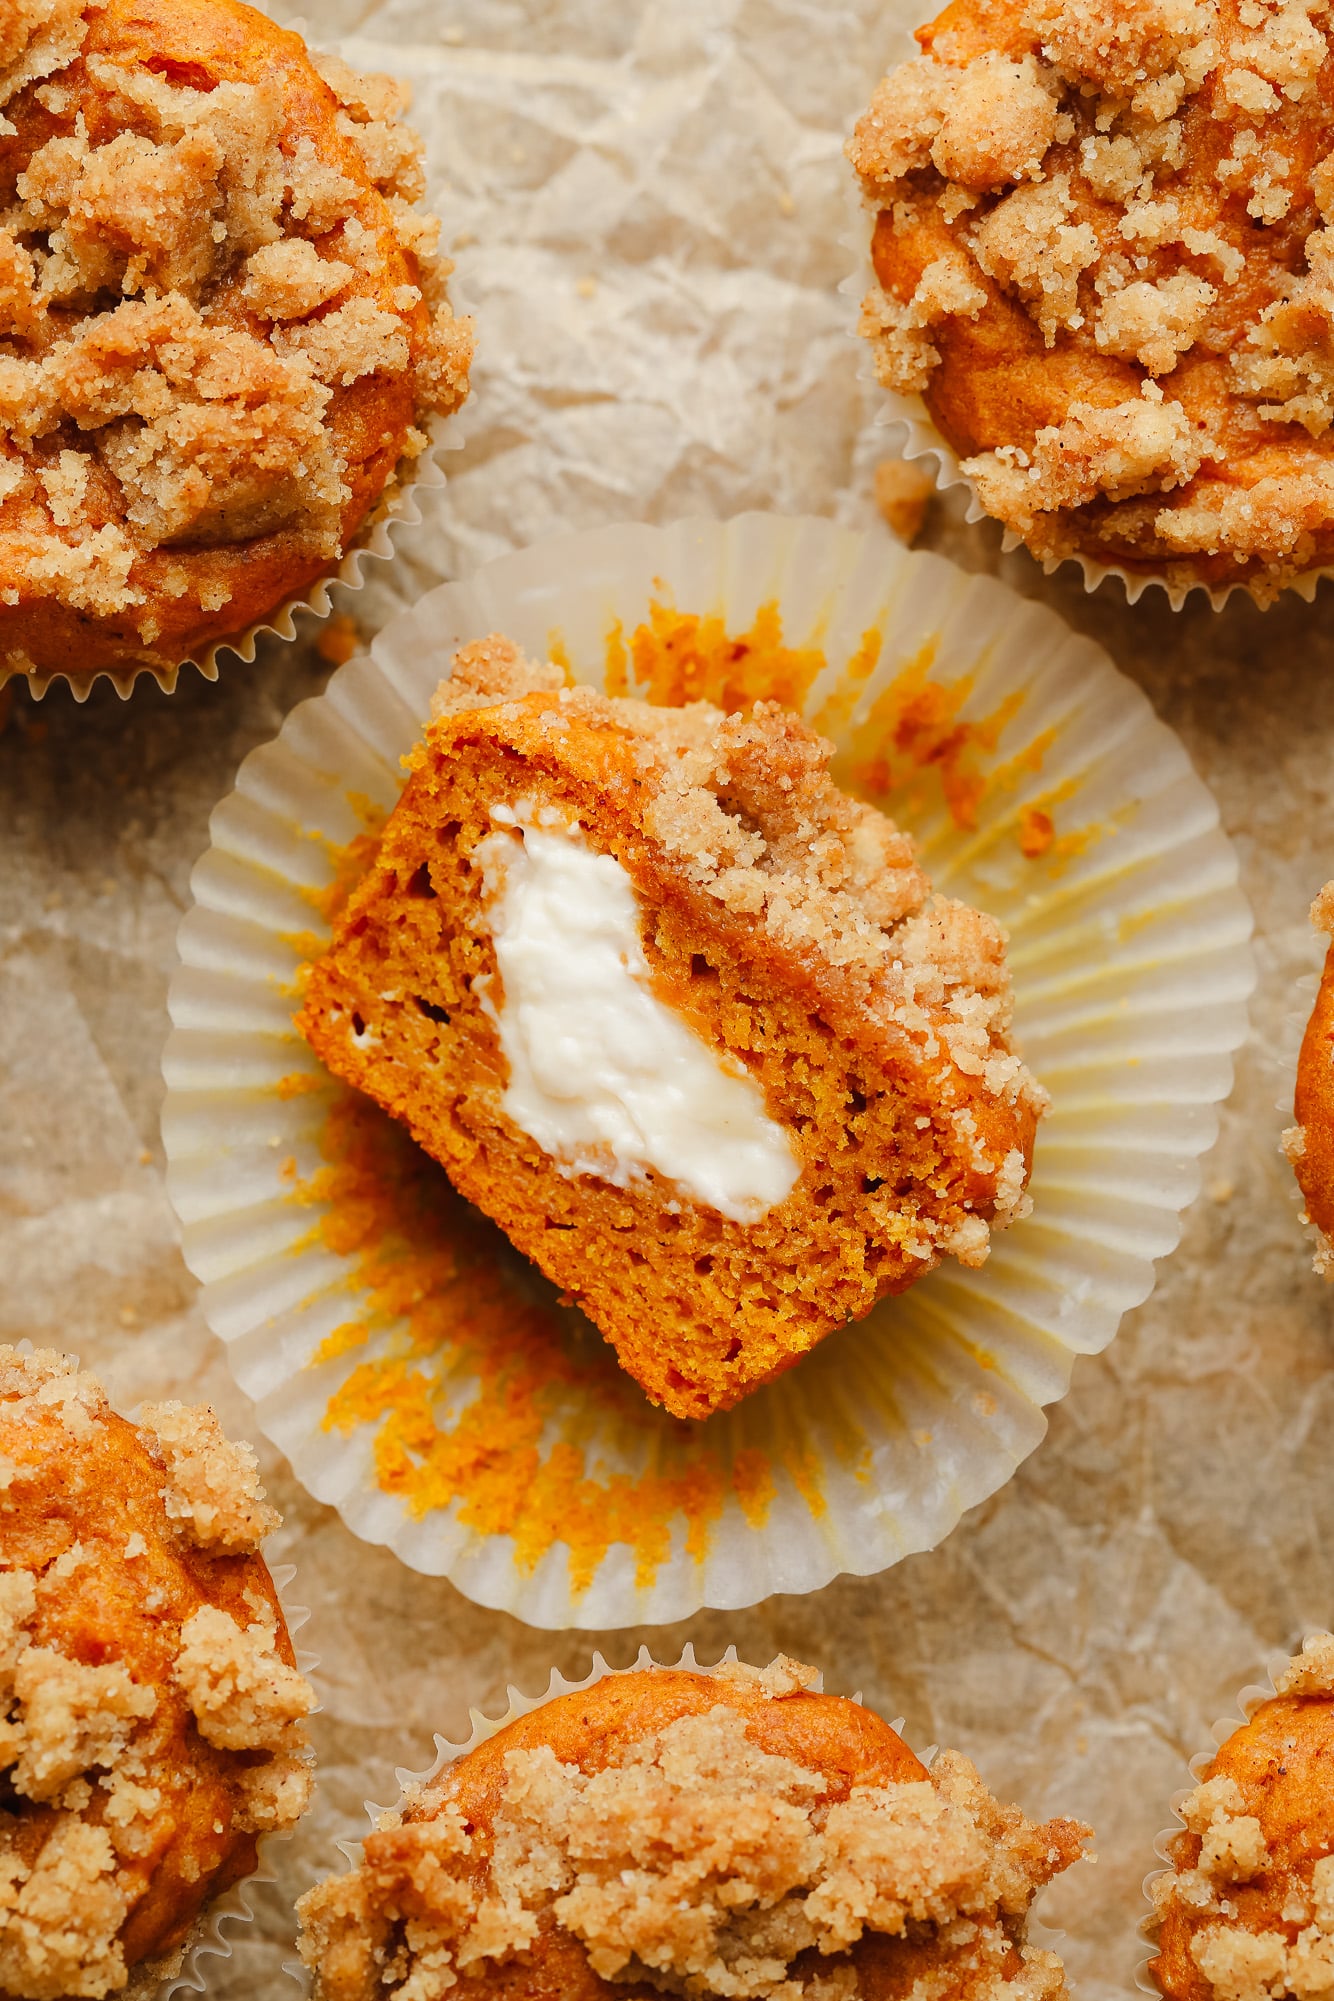 a vegan pumpkin cream cheese muffin sliced in half and turned on its side, showing vegan cream cheese in the middle.